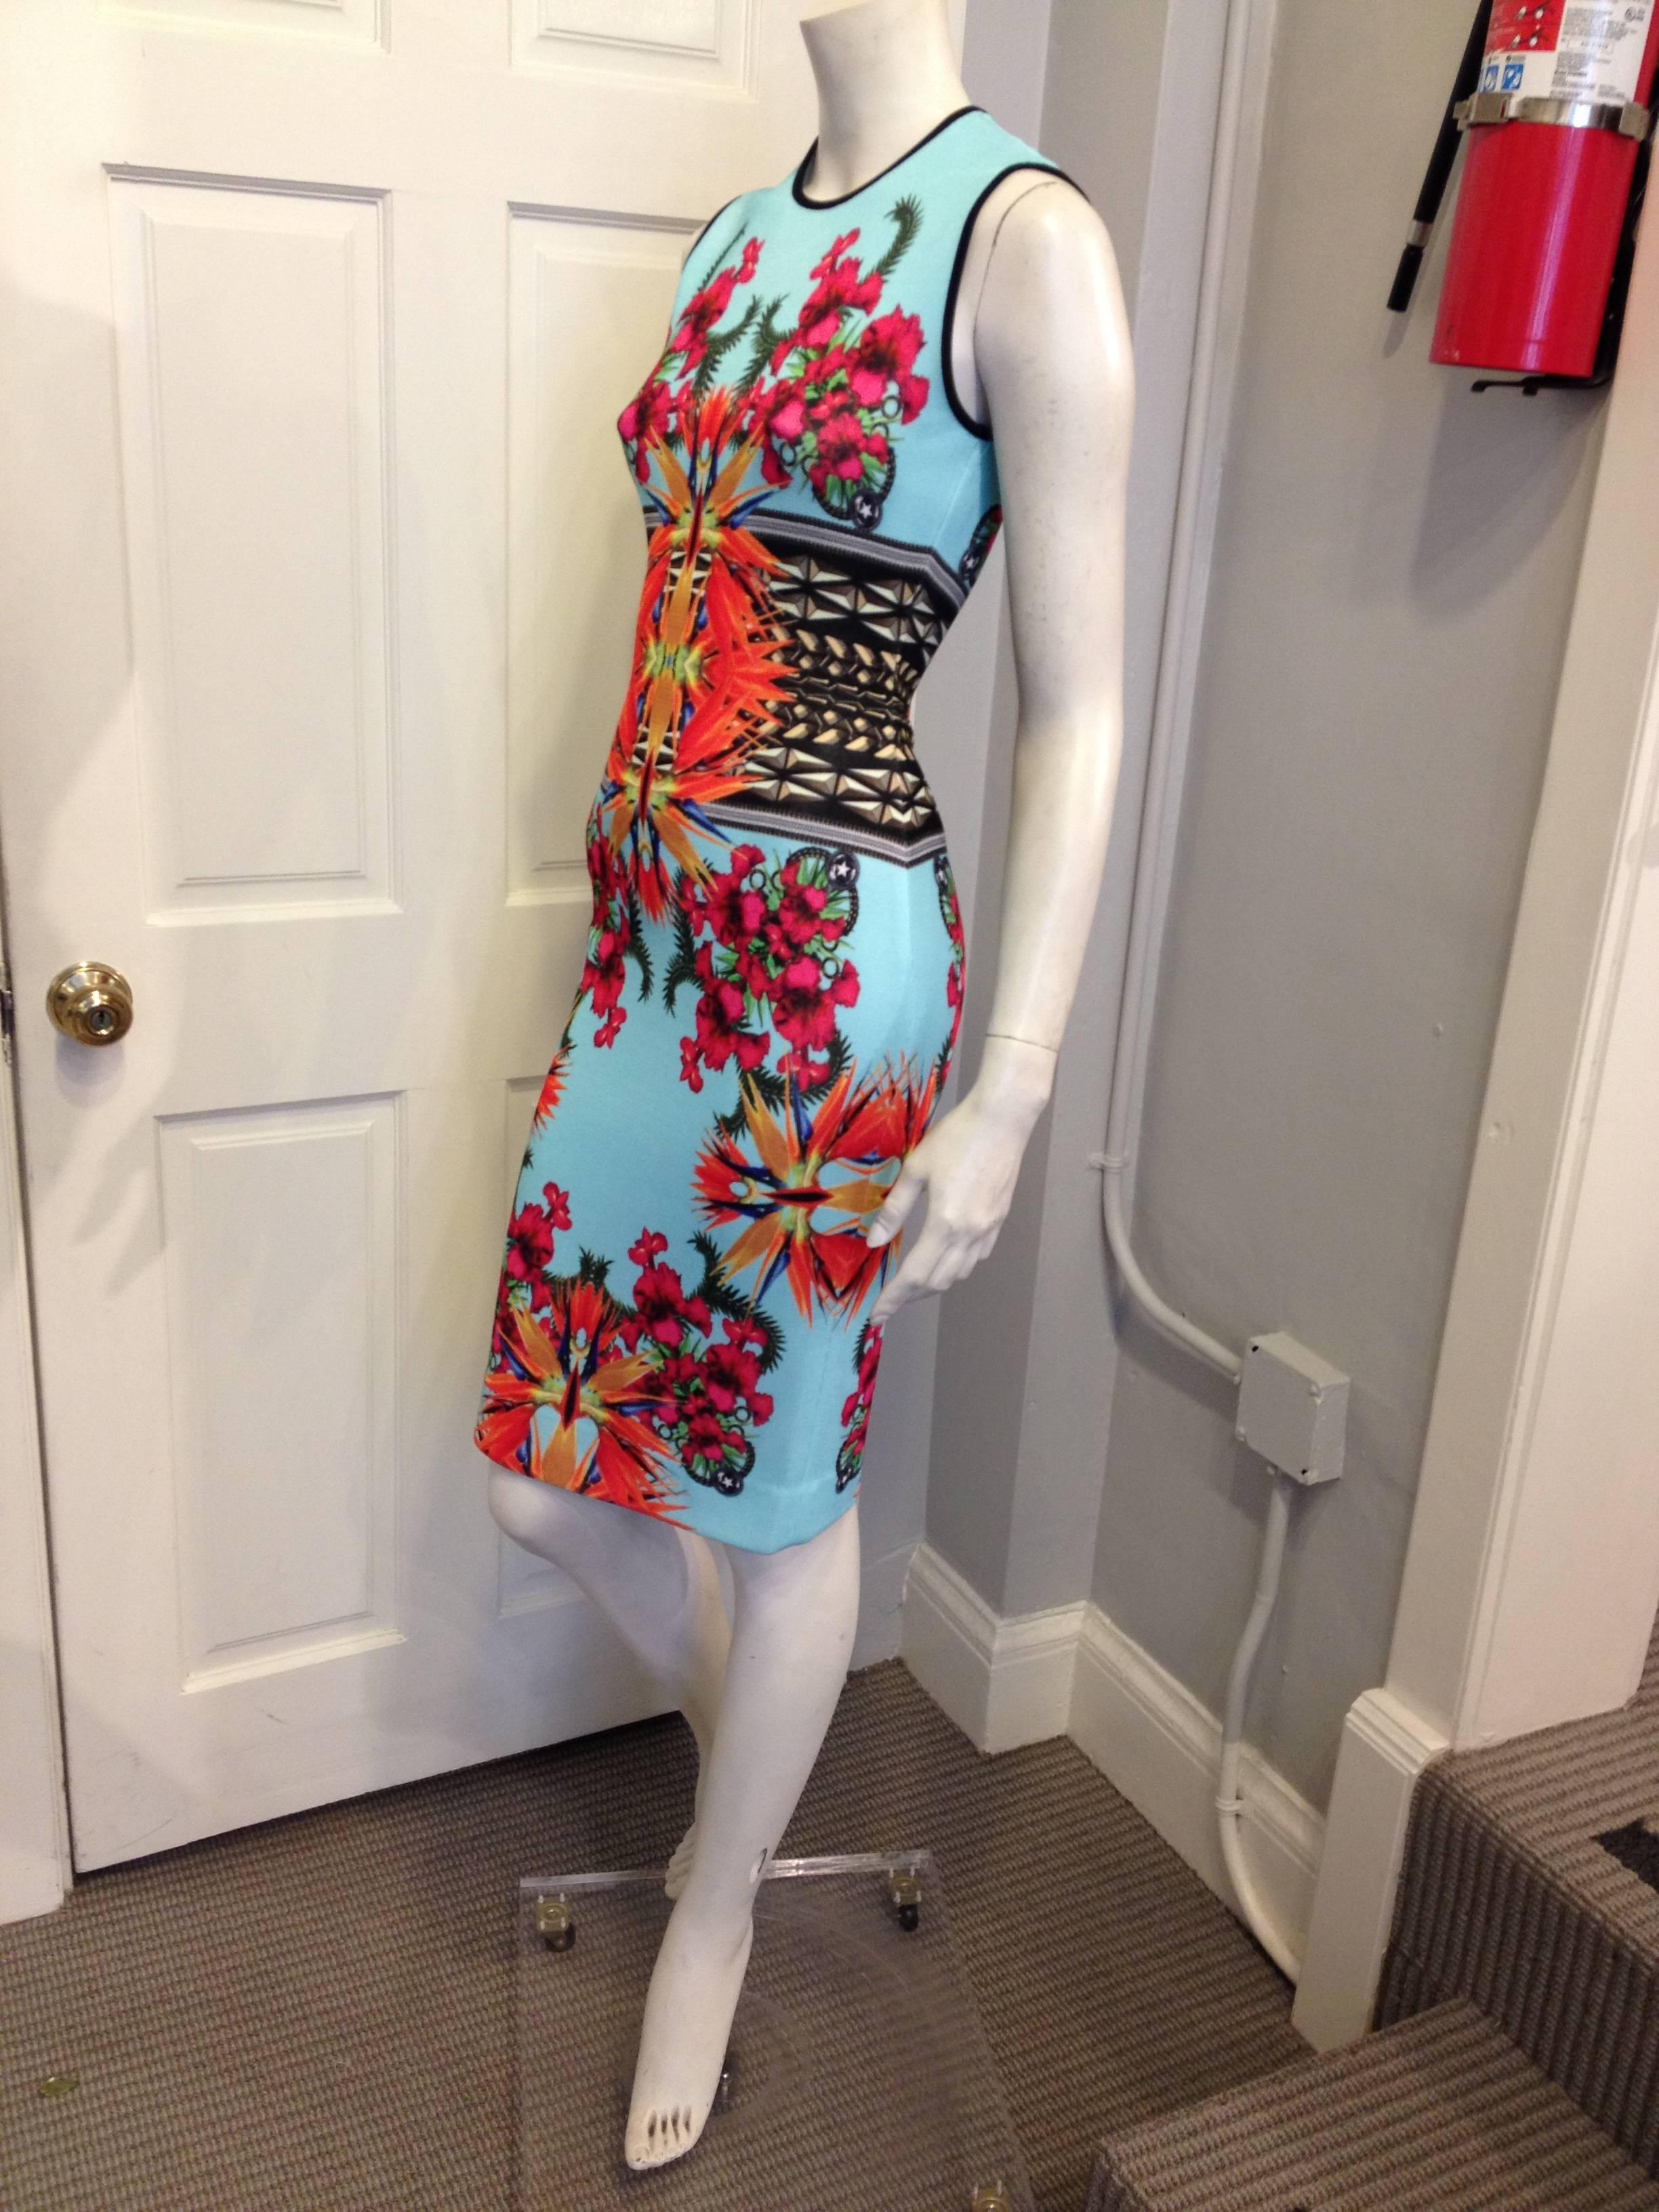 Bright  orange bird of paradise flowers and vibrant fuchsia irises blossom amidst fern fronds, all on a background of aqua the color of Hawaiian ocean water. The tight pique knit and bodycon cut make this piece good for either the day or for a night